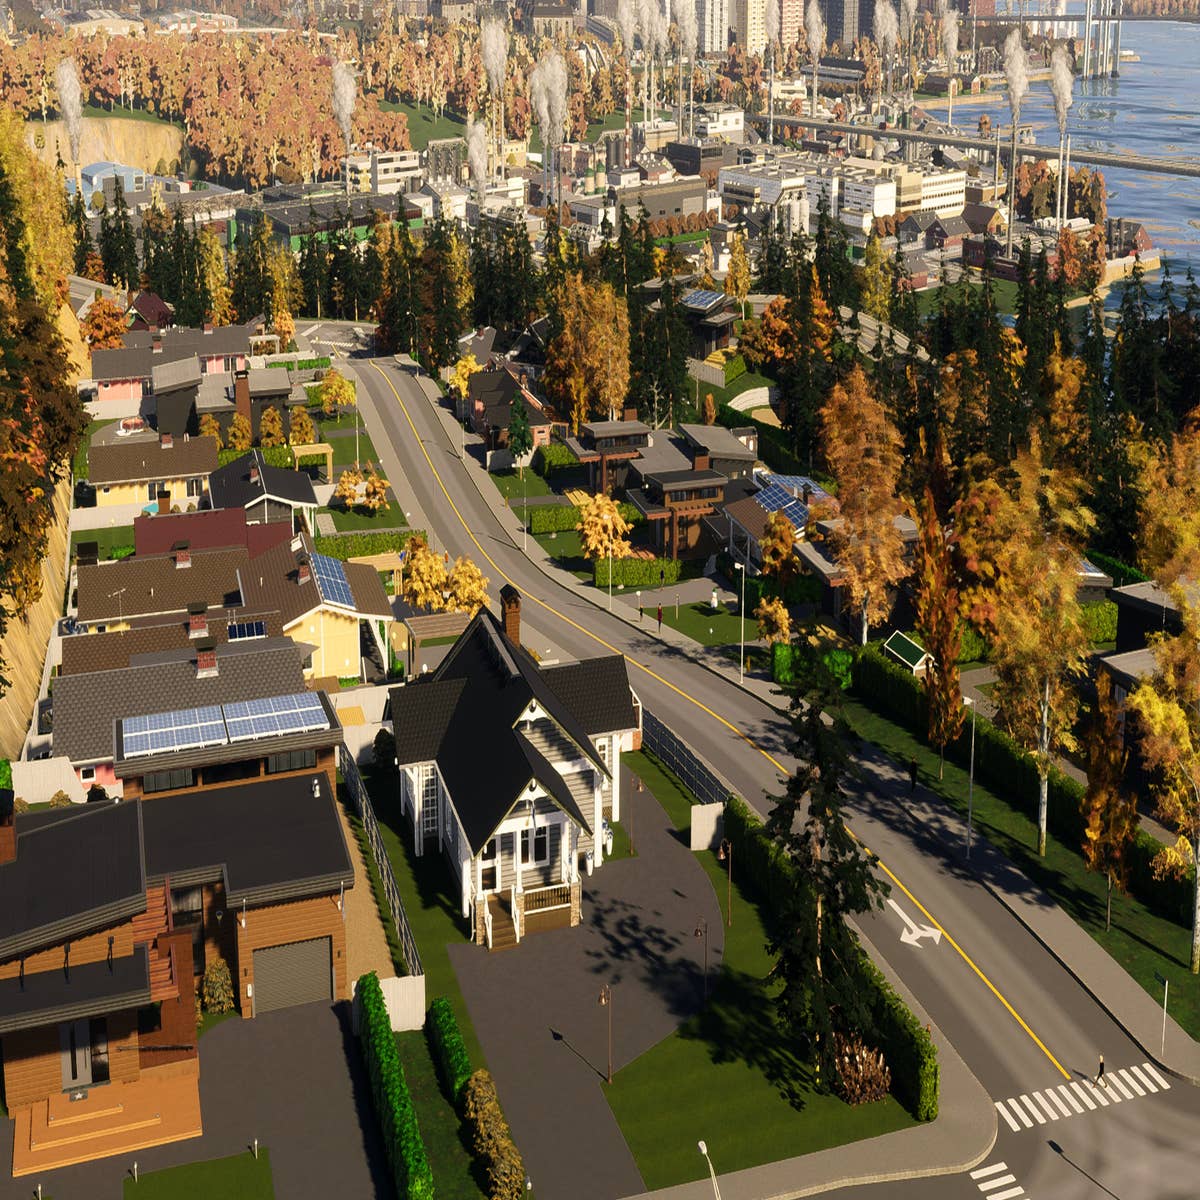 Cities: Skylines 2 mod support has been delayed by several months